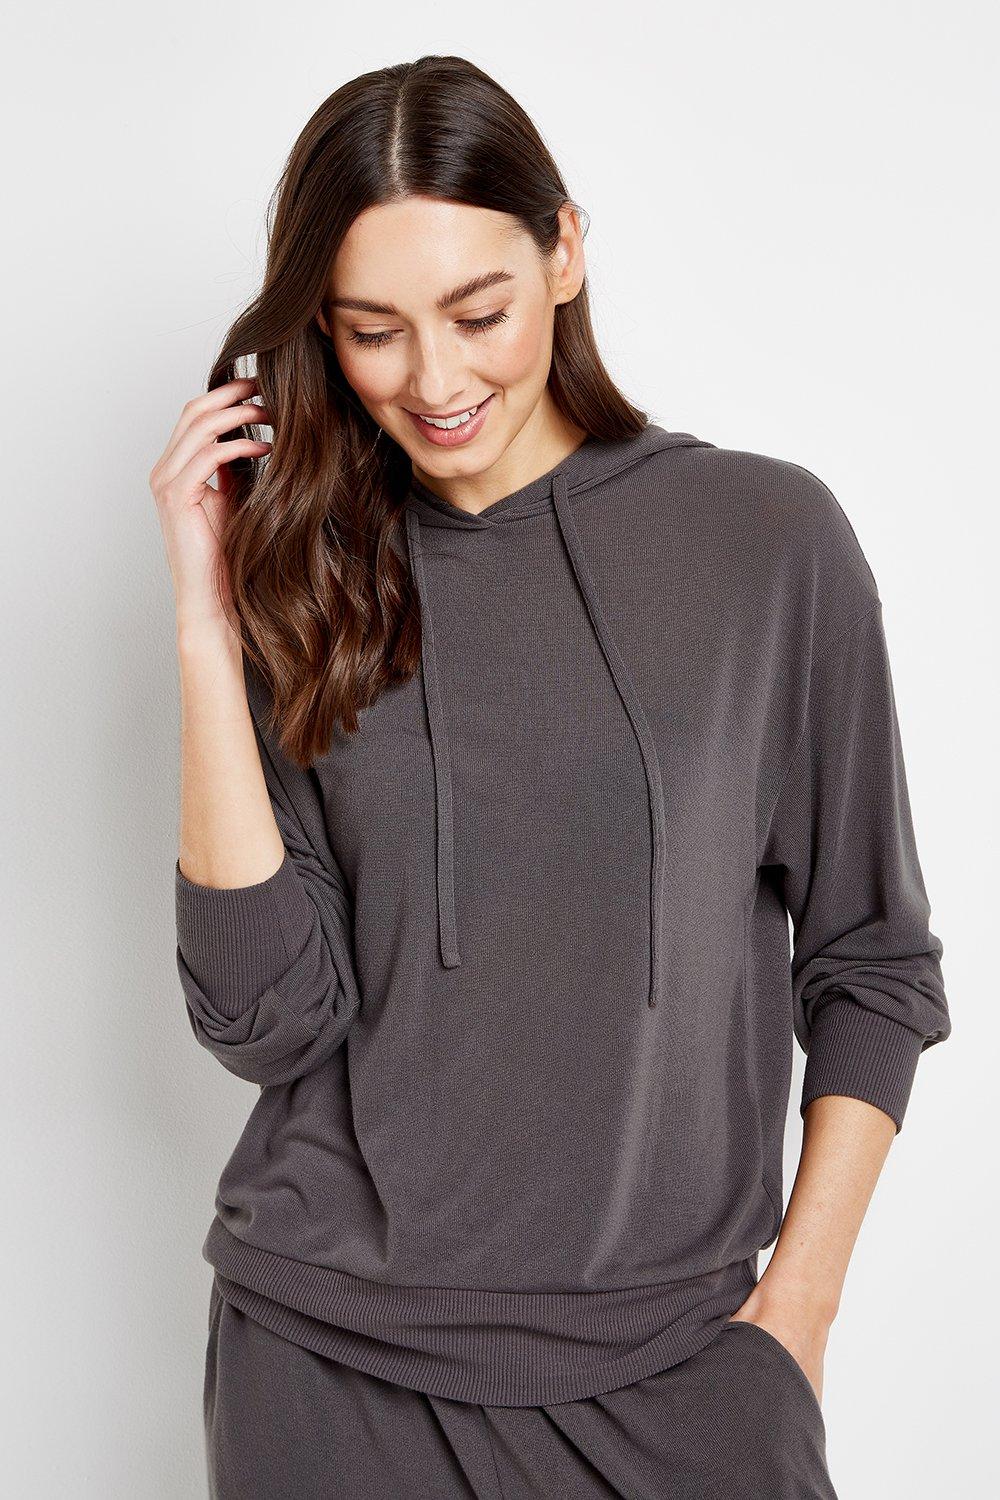 This Cosy Jumper Is The Perfect Piece To Add To Your Collection. A Relaxed Fit And Laid-Back Style Makes This A Must-Have For Every Wardrobe, Just Team With The Matching Joggers And Chunky Trainers For Easy Everyday Style.  Jumper Round Neck Long Sleeve H